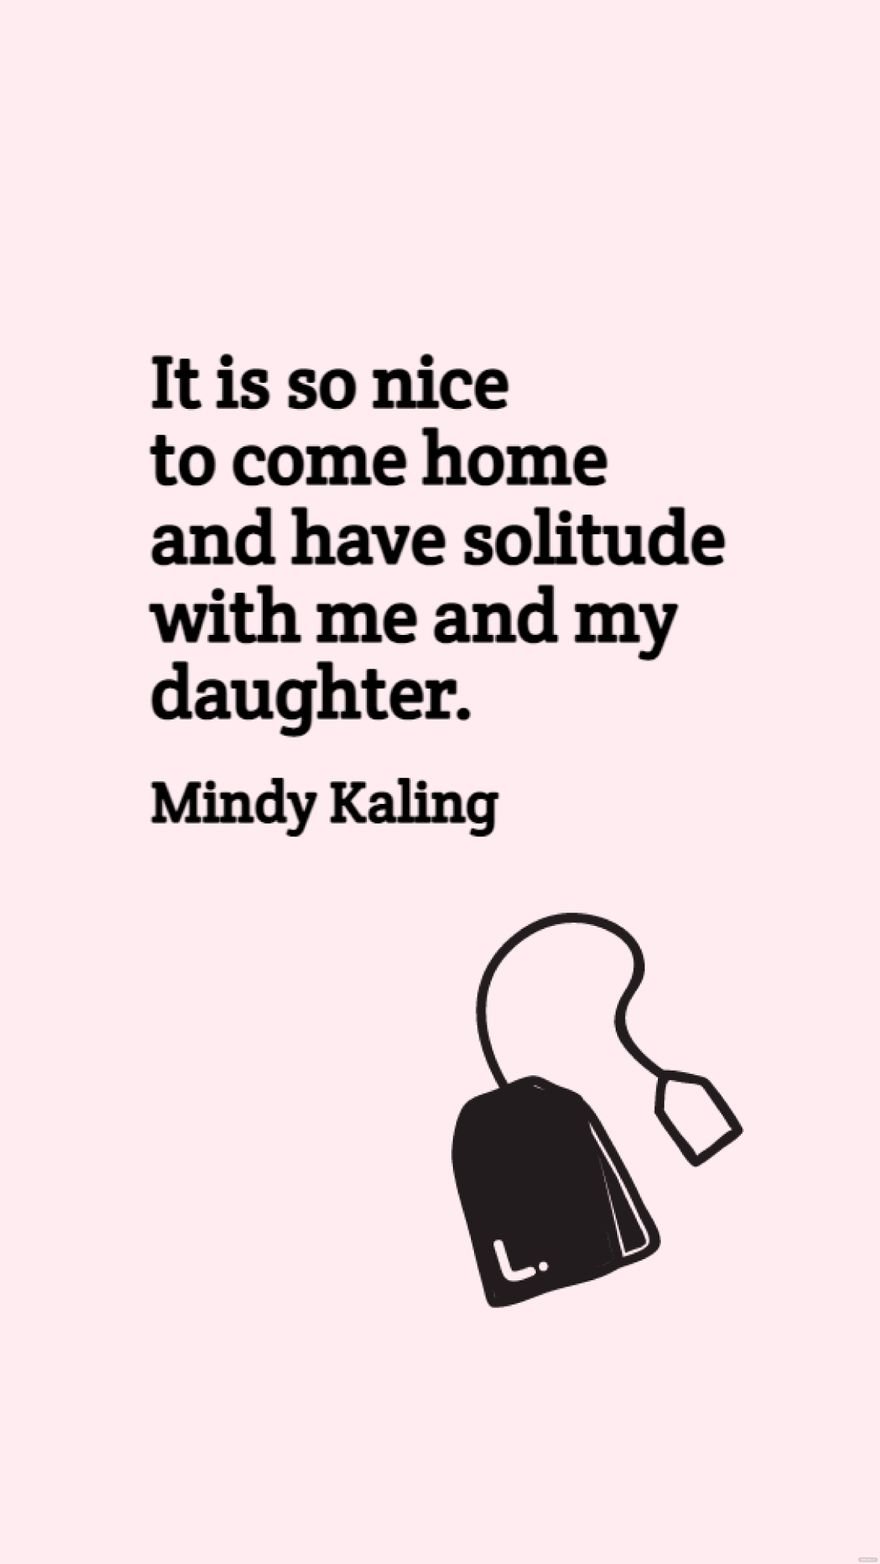 Mindy Kaling - It is so nice to come home and have solitude with me and my daughter.